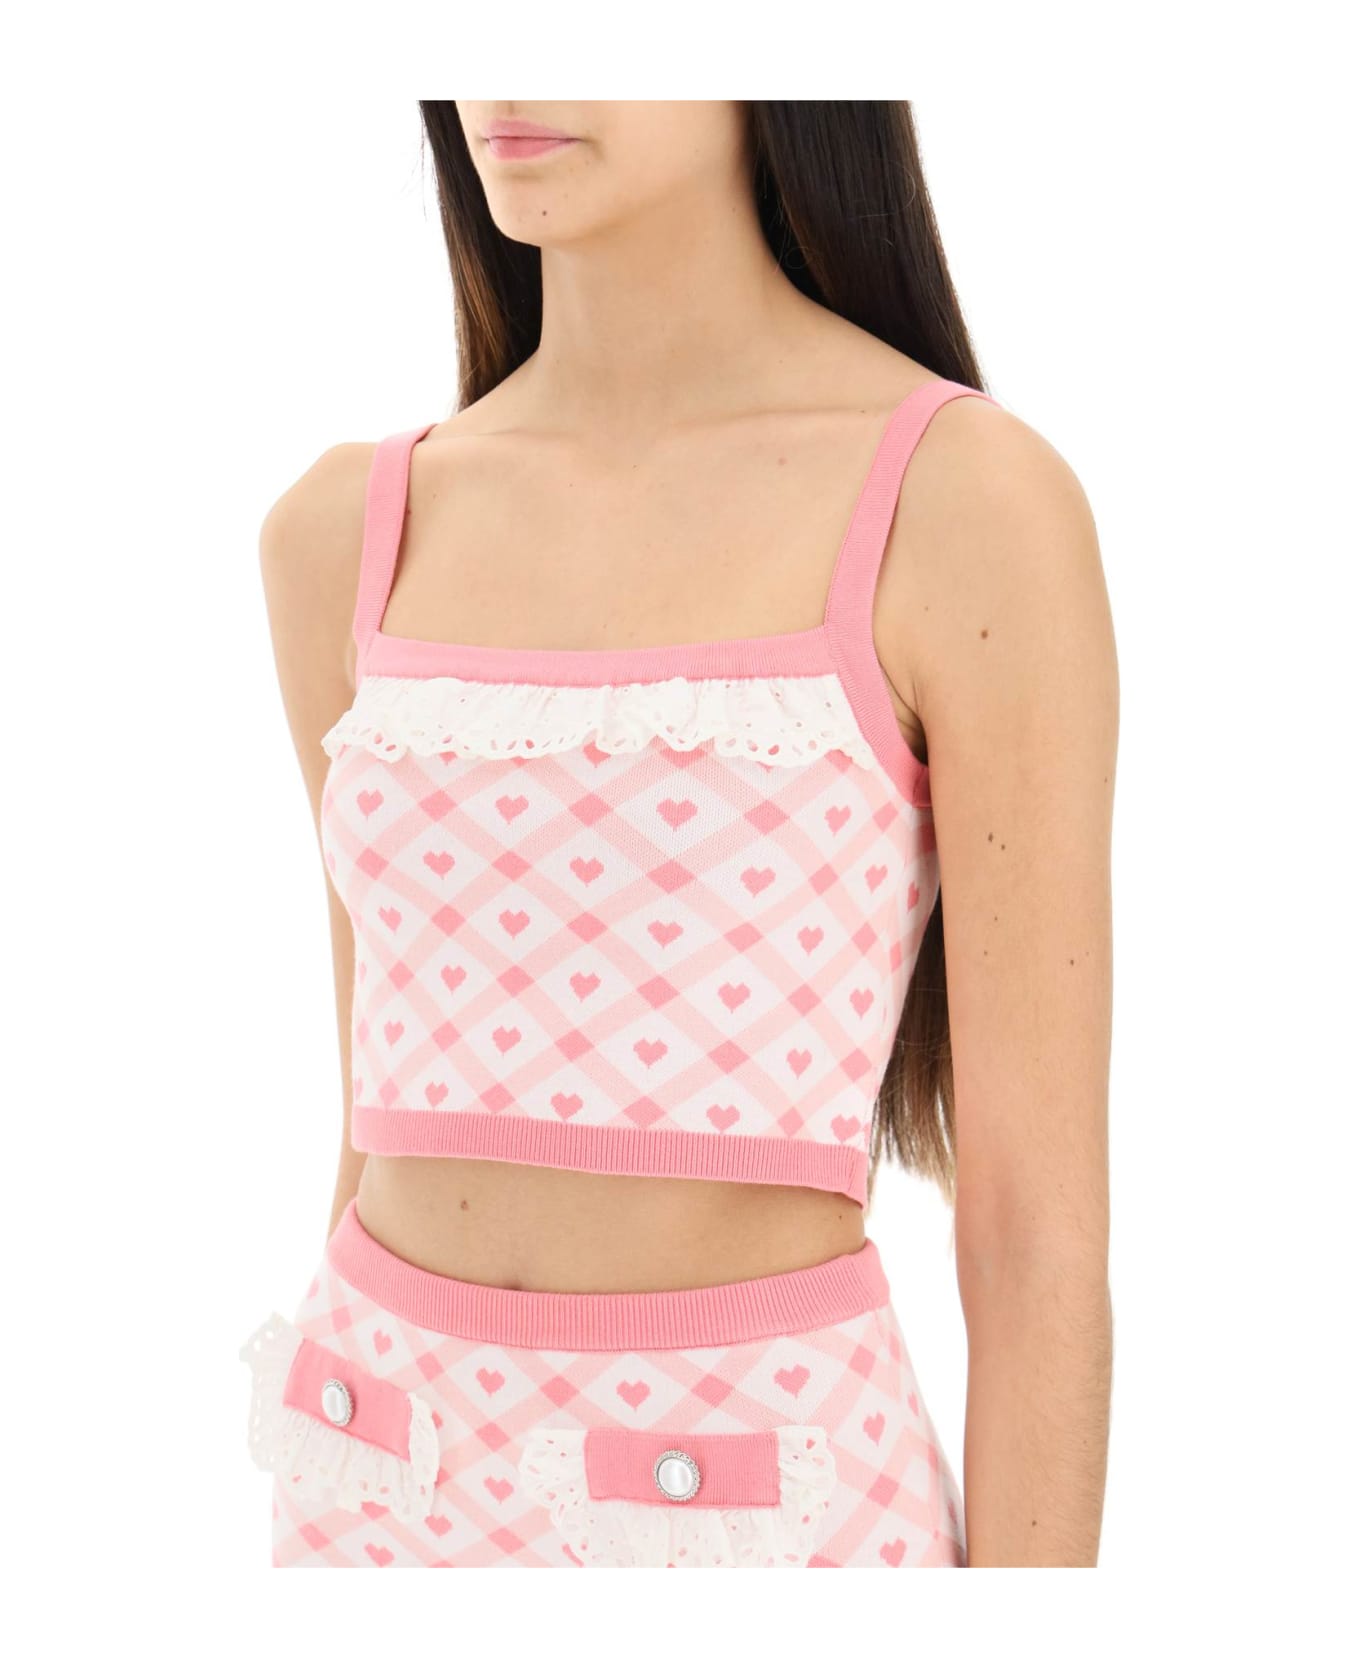 Alessandra Rich Checked Cropped Top - LIGHT PINK WHITE (Pink)